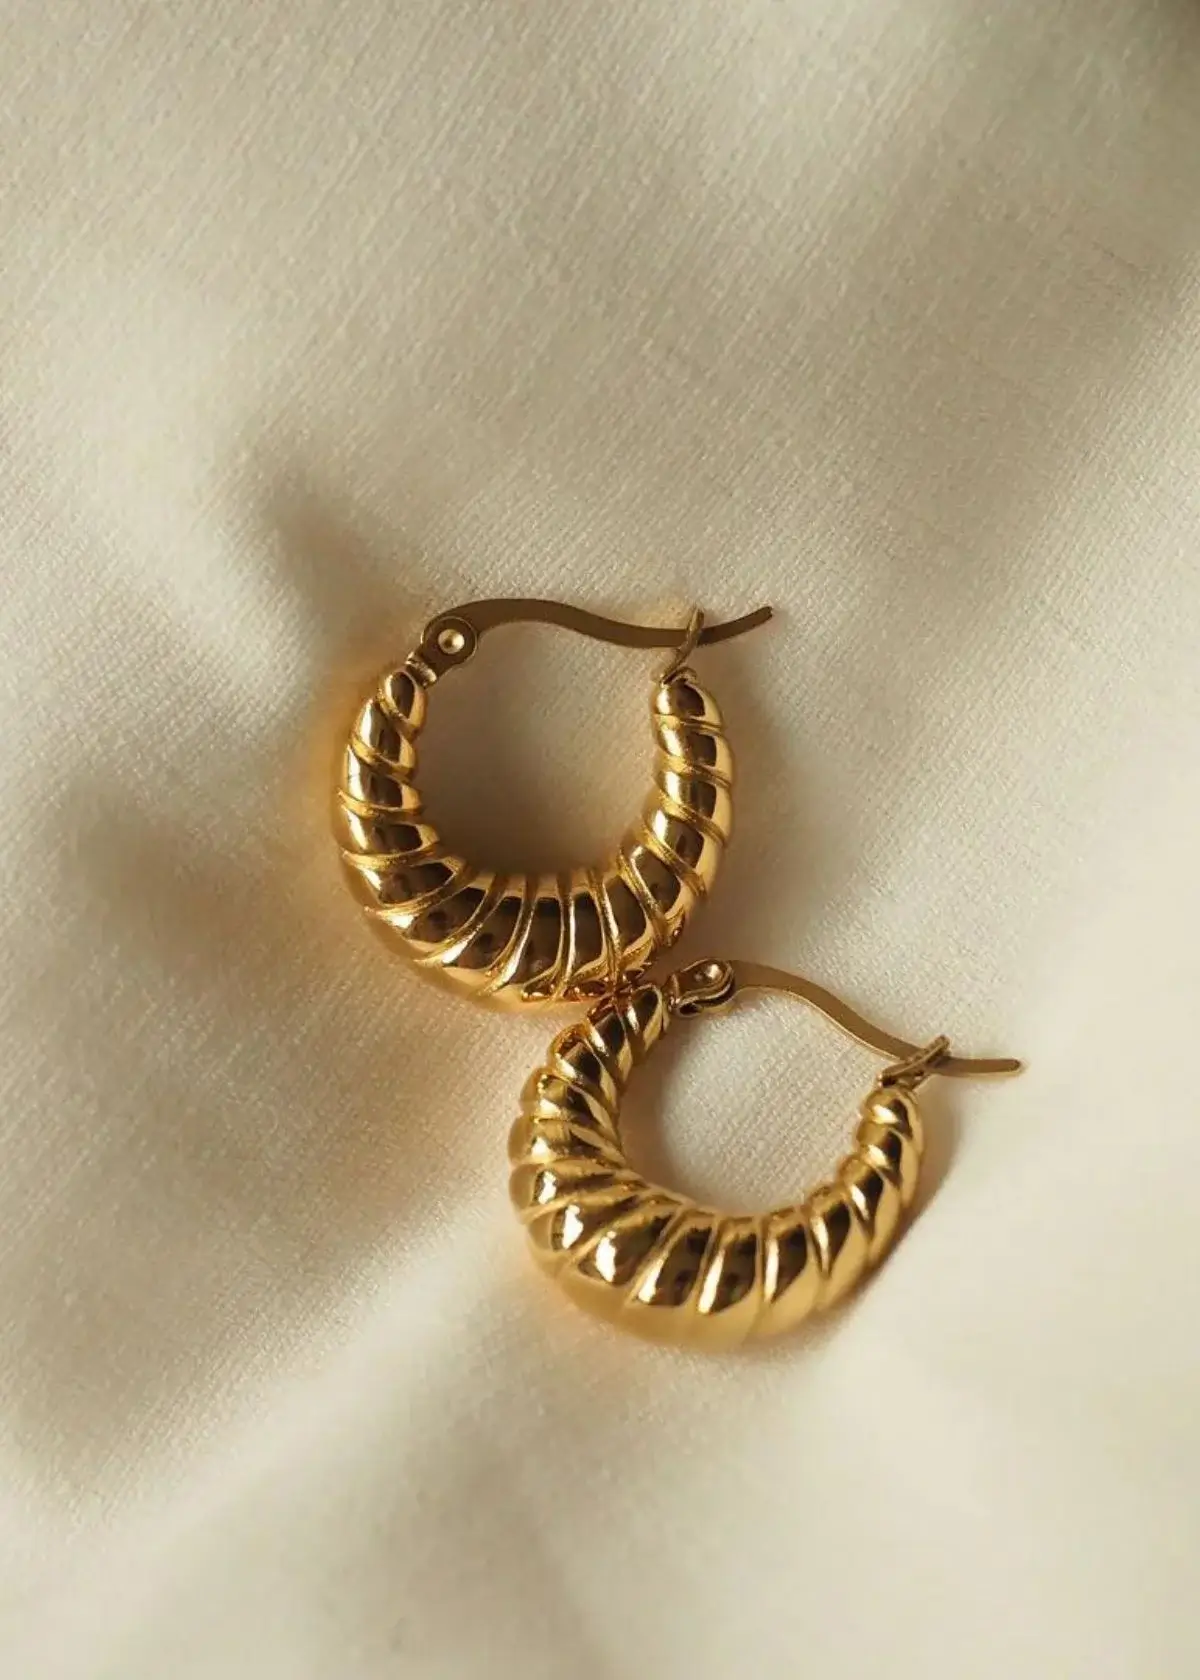 How to Style Croissant Earrings?